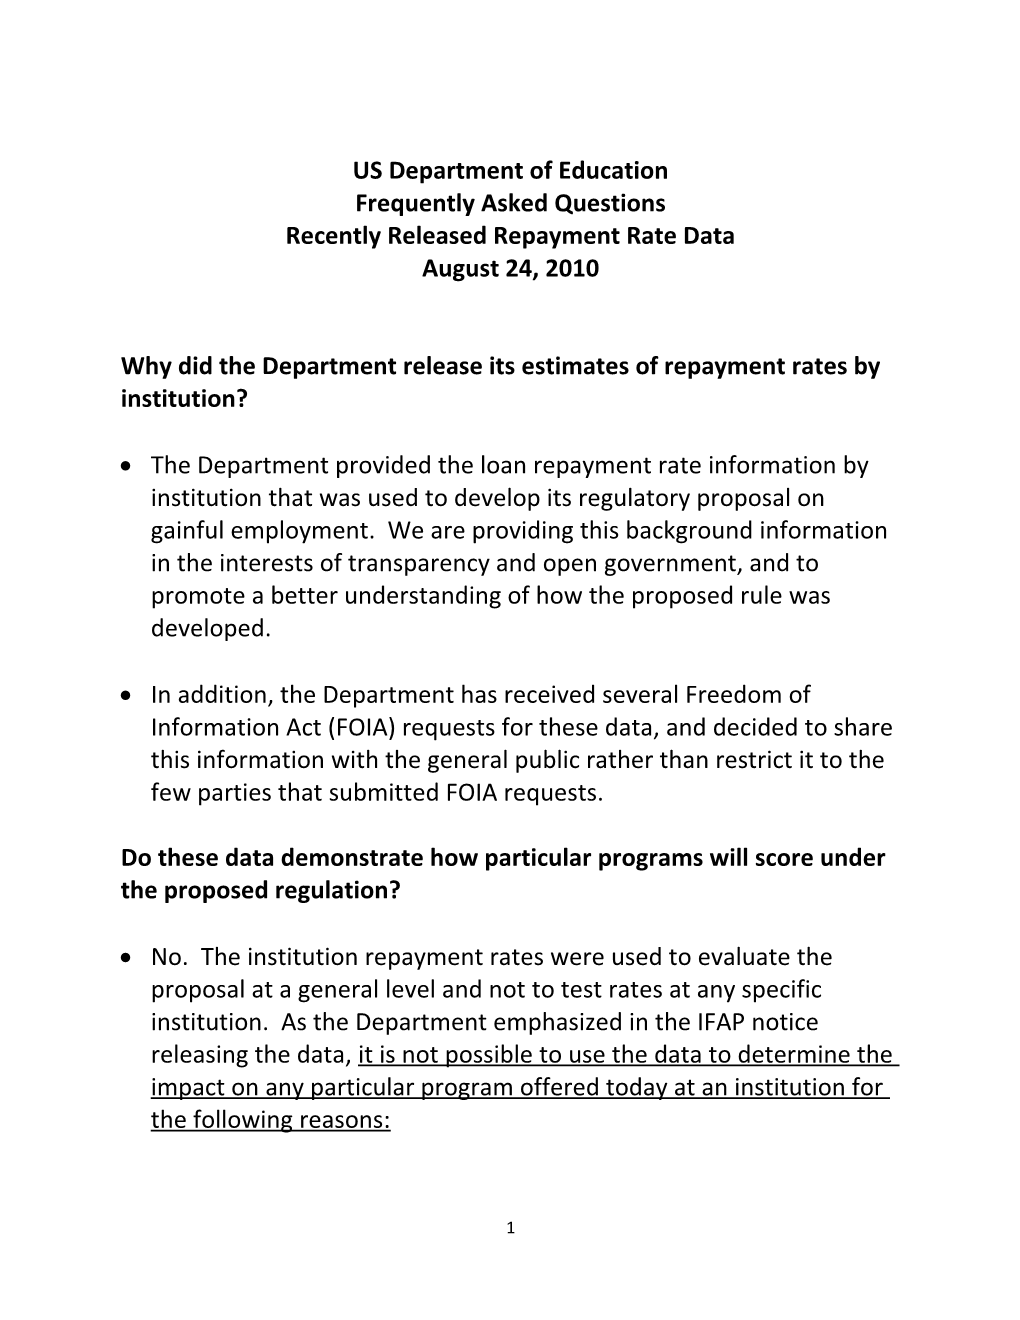 Gainful Employment - Repayment Rate Data - Frequently Asked Questions (MS Word)